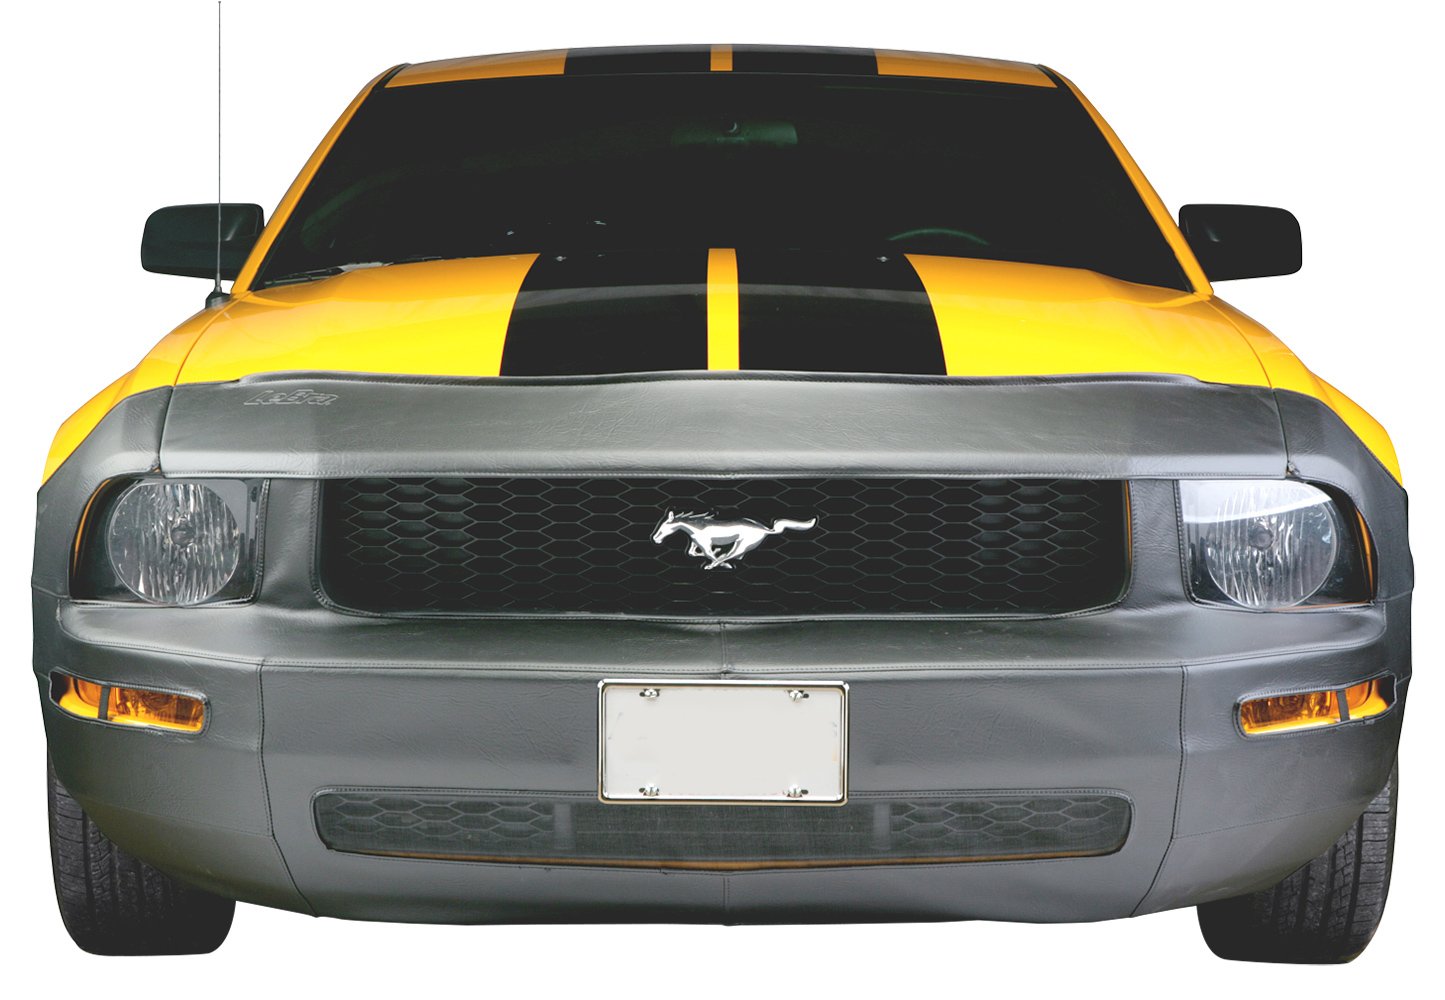 LeBra 551342-01 Each LeBra is specifically designed to your exact vehicle model Front End Bra LeBra Custom Front End Cover If your model has fog lights special air-intakes or even pop-up headlights there is a LeBra for you 